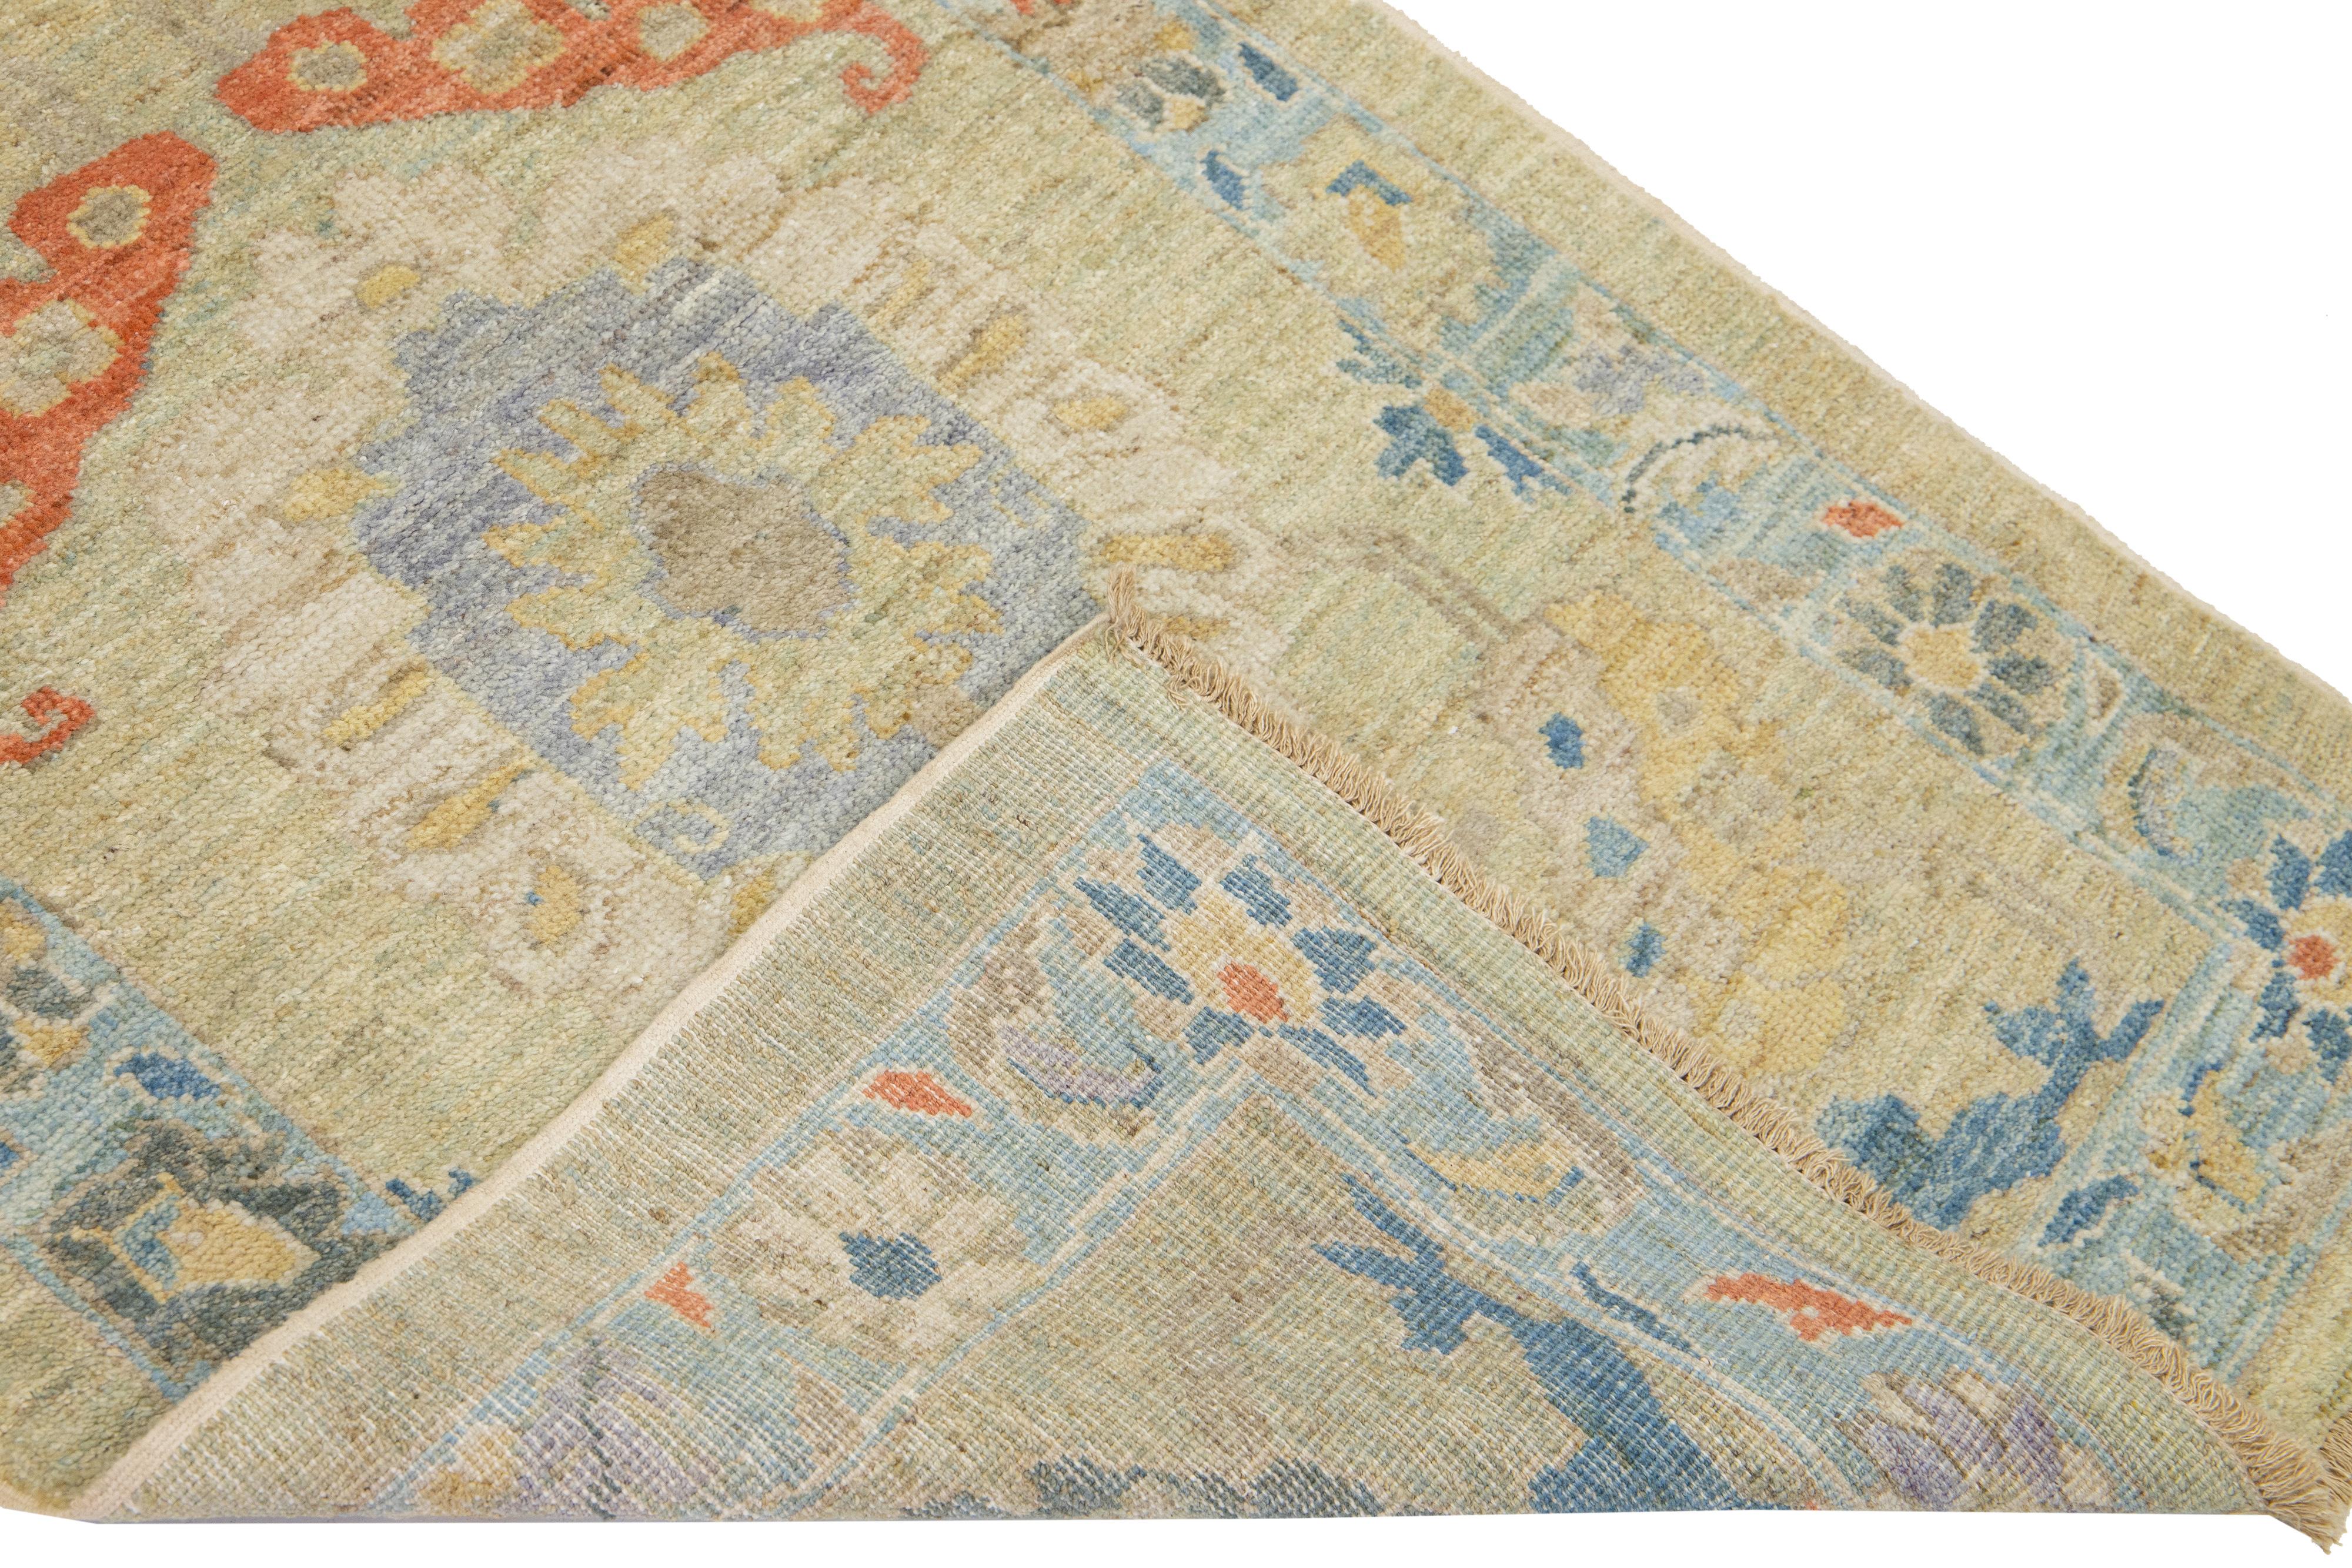 Beautiful modern Mahal hand-knotted wool runner with a beige and green field. This Piece has a blue-designed frame and multicolor accent colors in a gorgeous all-over Classic floral design.

This rug measures: 3'2